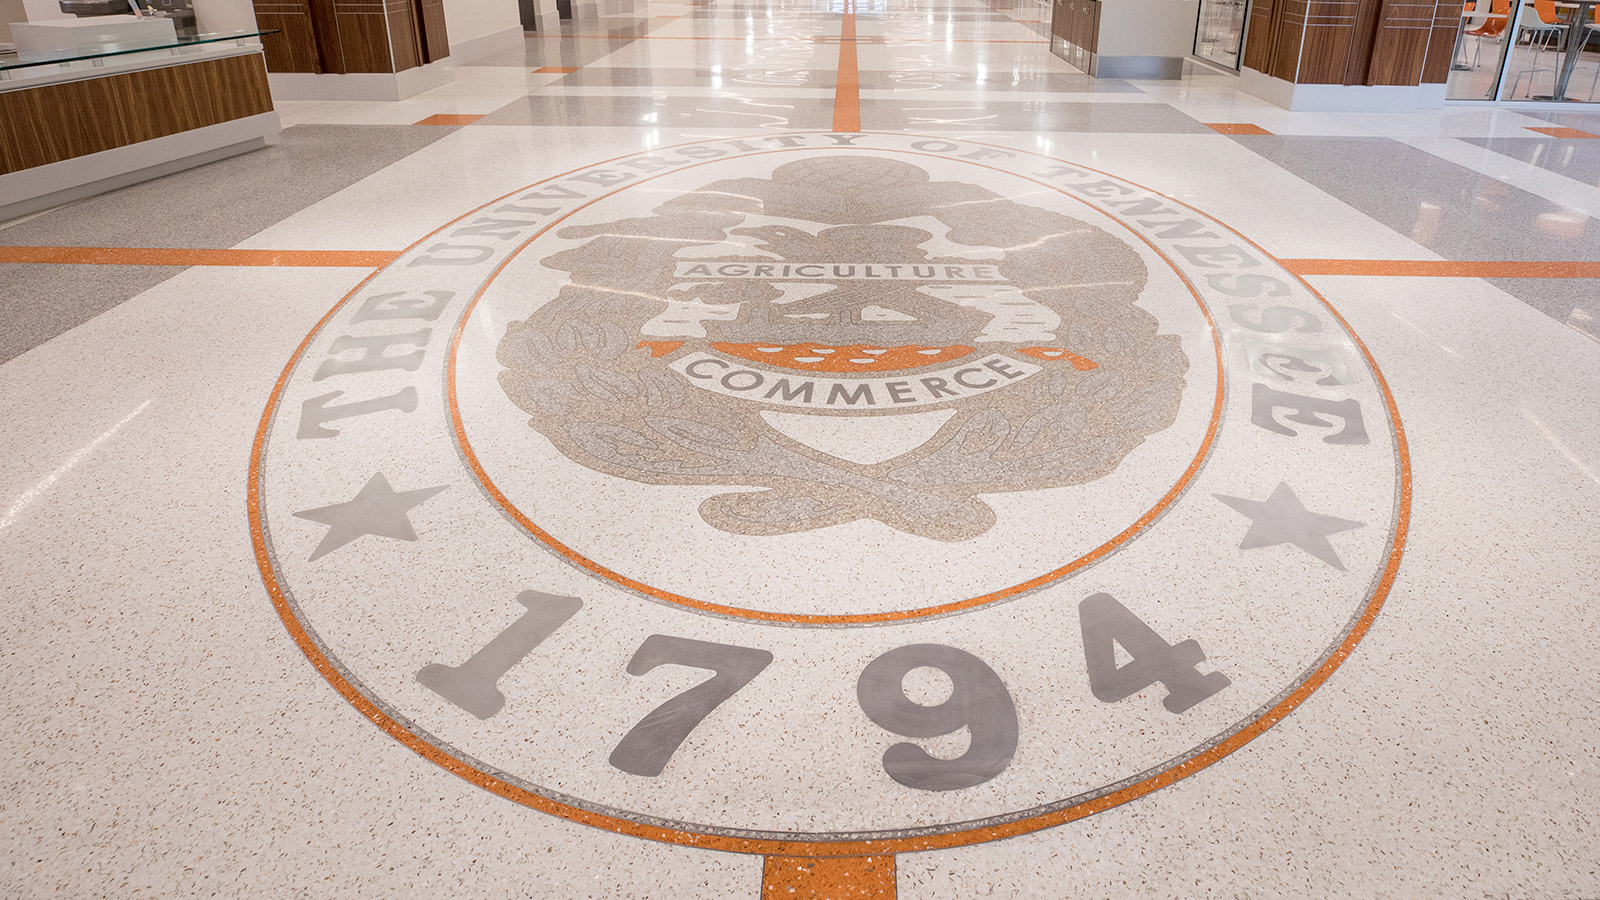 University of Tennessee seal inlaid in the floor of the UTK Student Union